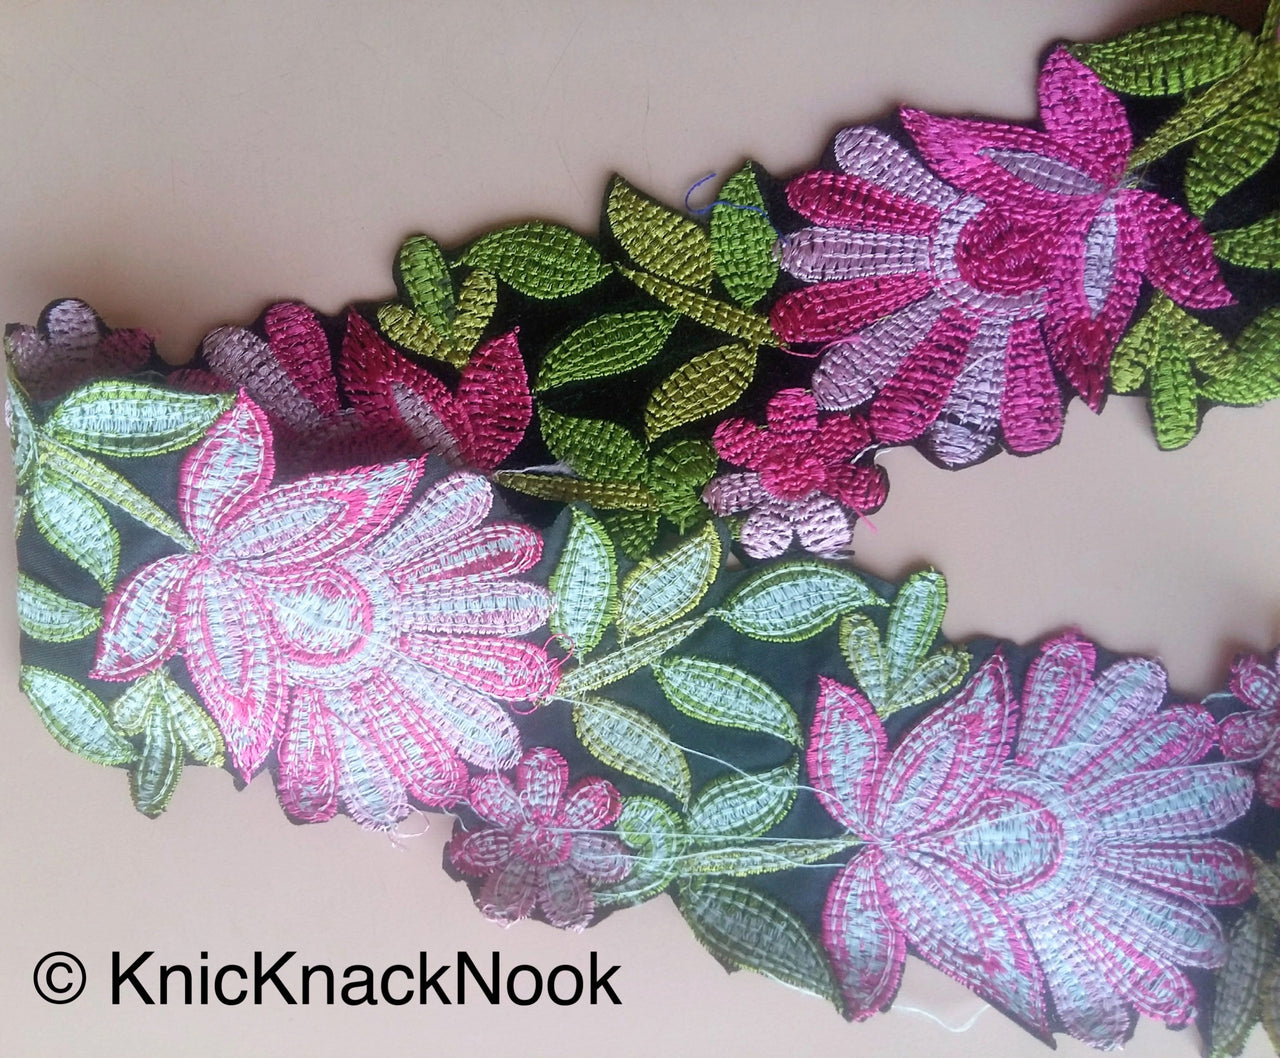 Black Velvet Fabric Trim With Pink / Blue And Green Floral Embroidery, 76mm wide - 200317L268 / 69